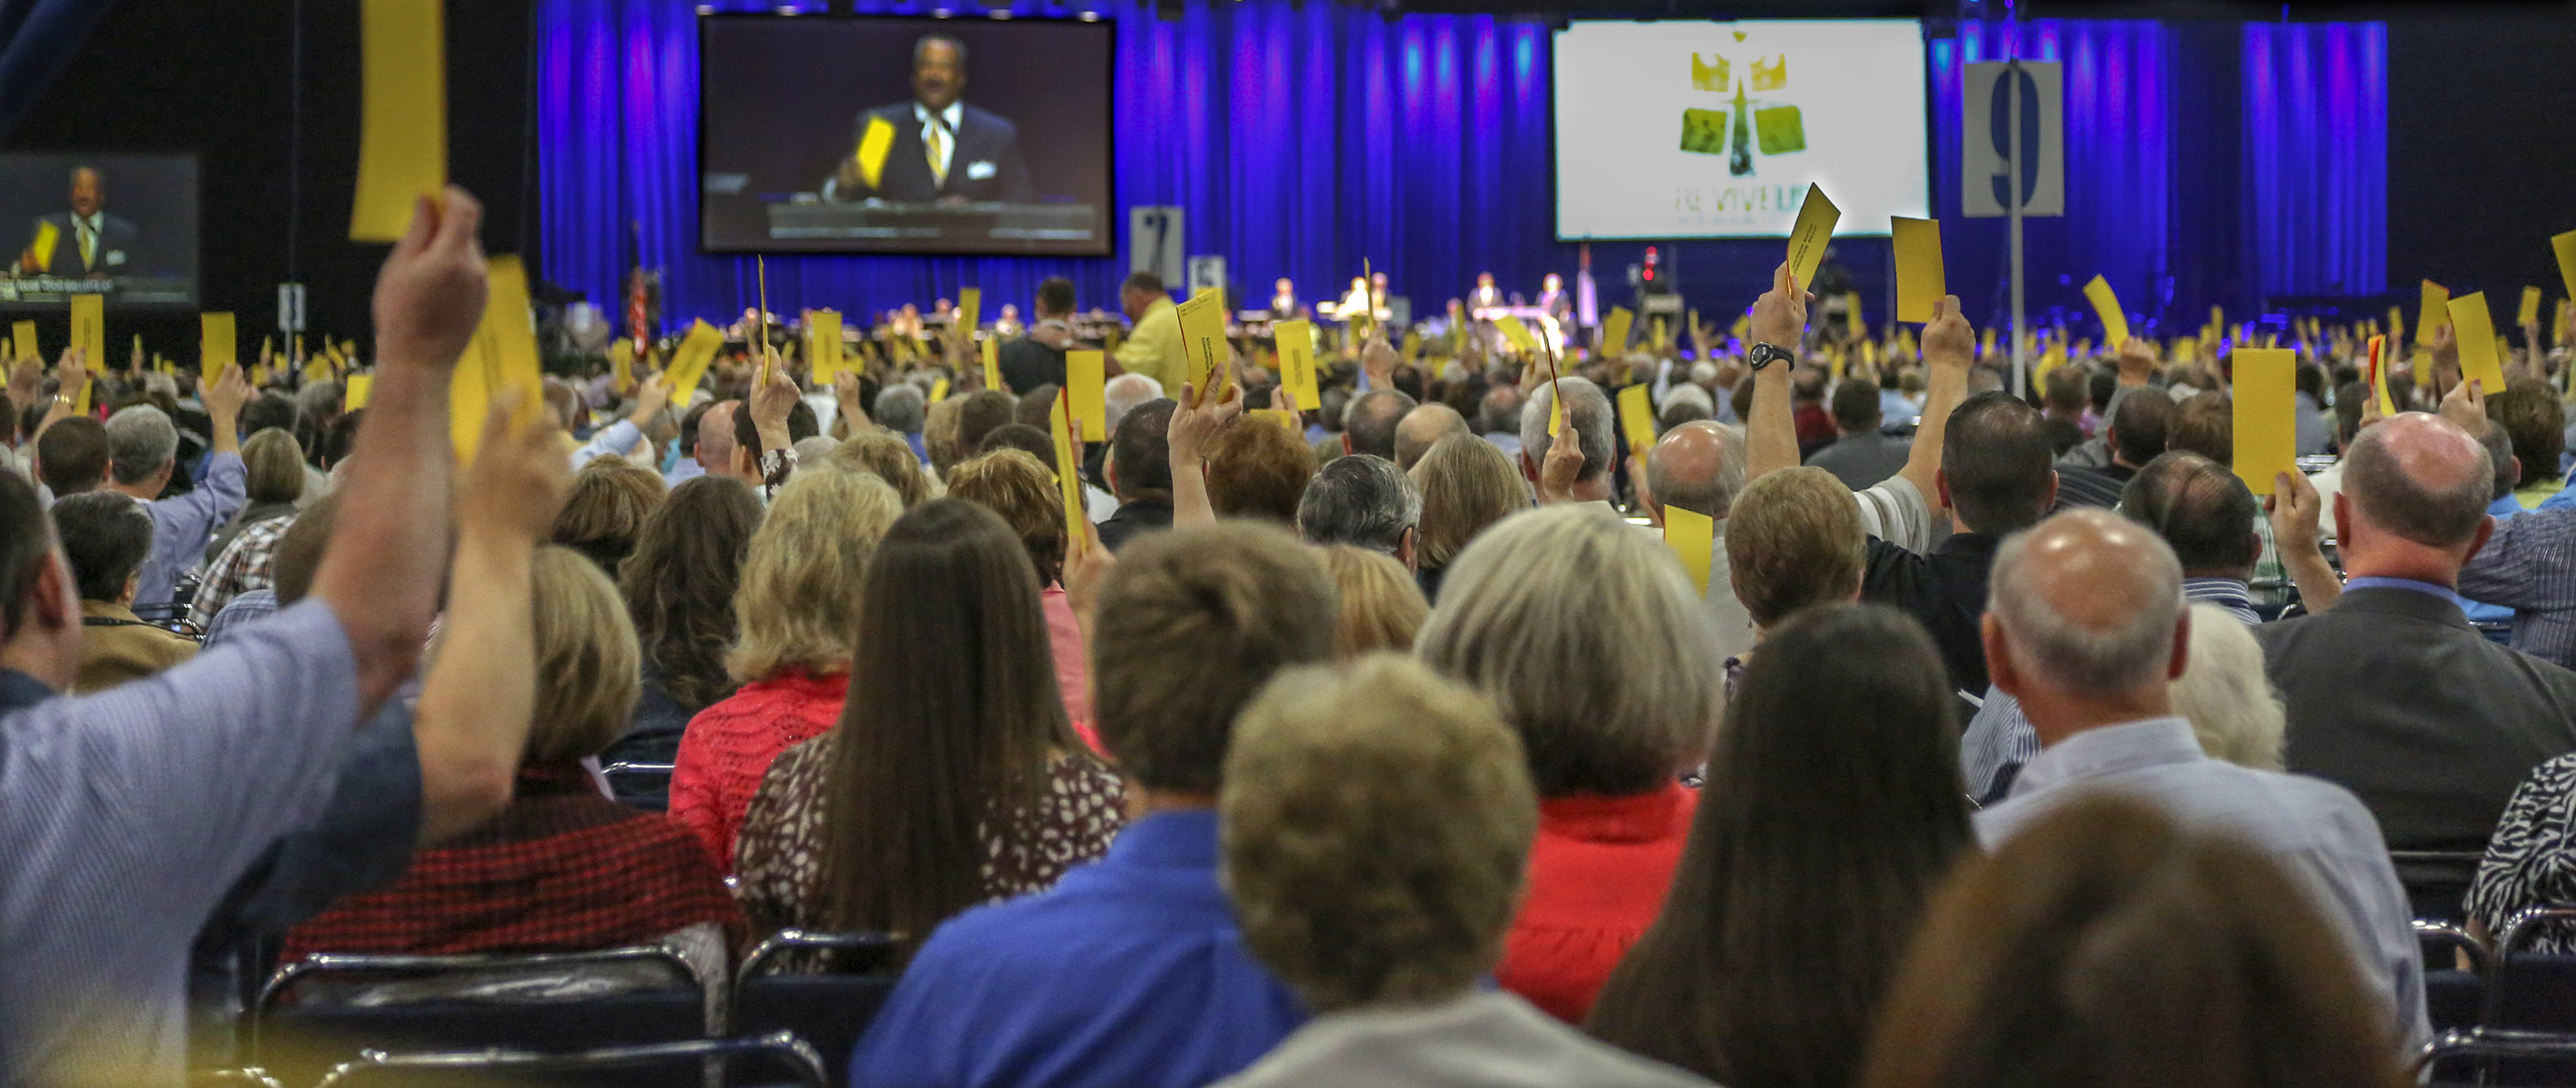 More than 5,100 Southern Baptist "messengers" met in Houston for the Annual Meeting of the Southern Baptist Convention. Photo by Van Payne / Baptist Press